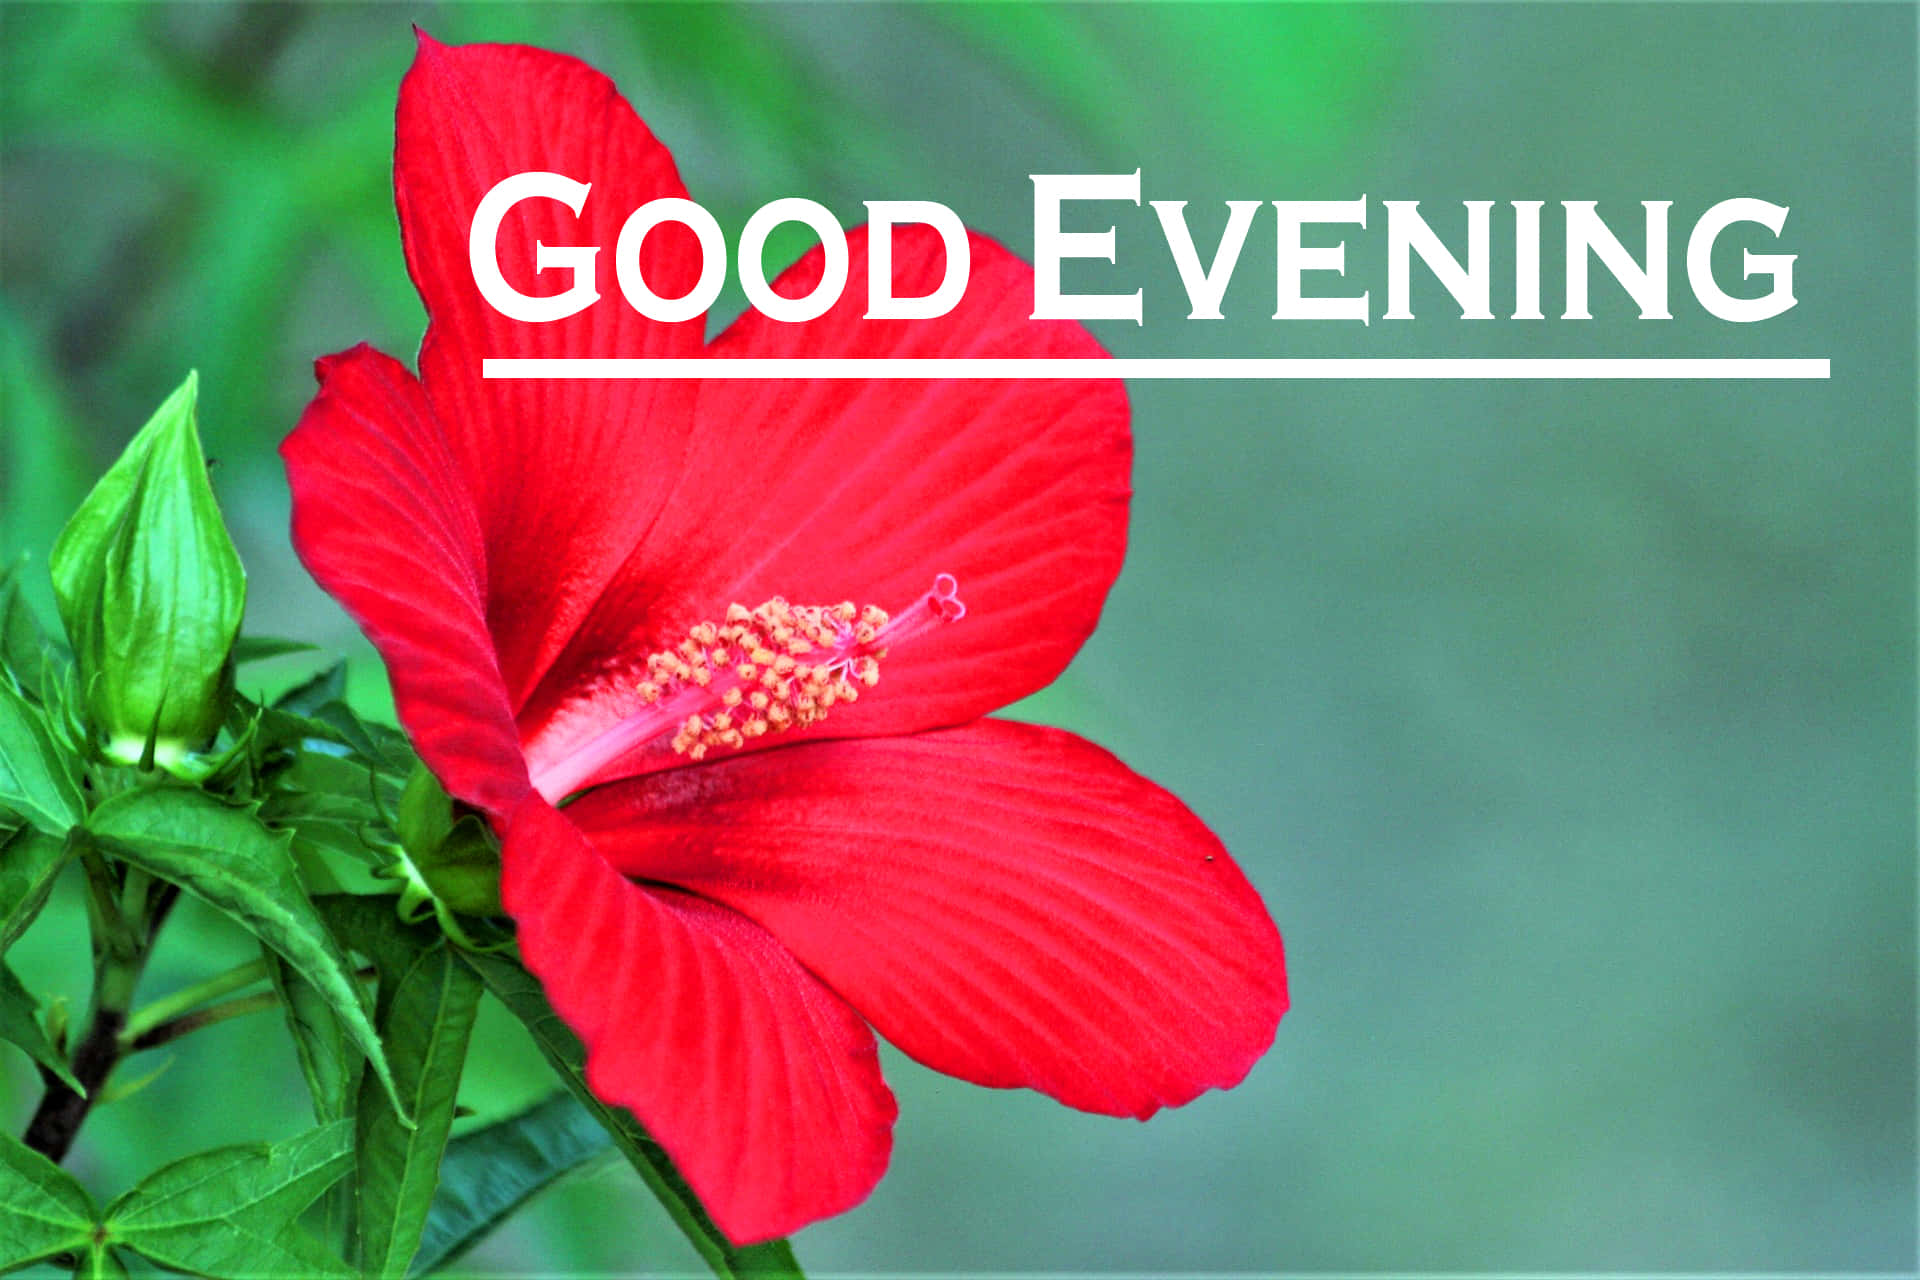 “Good Evening - Make the most of your evening!”